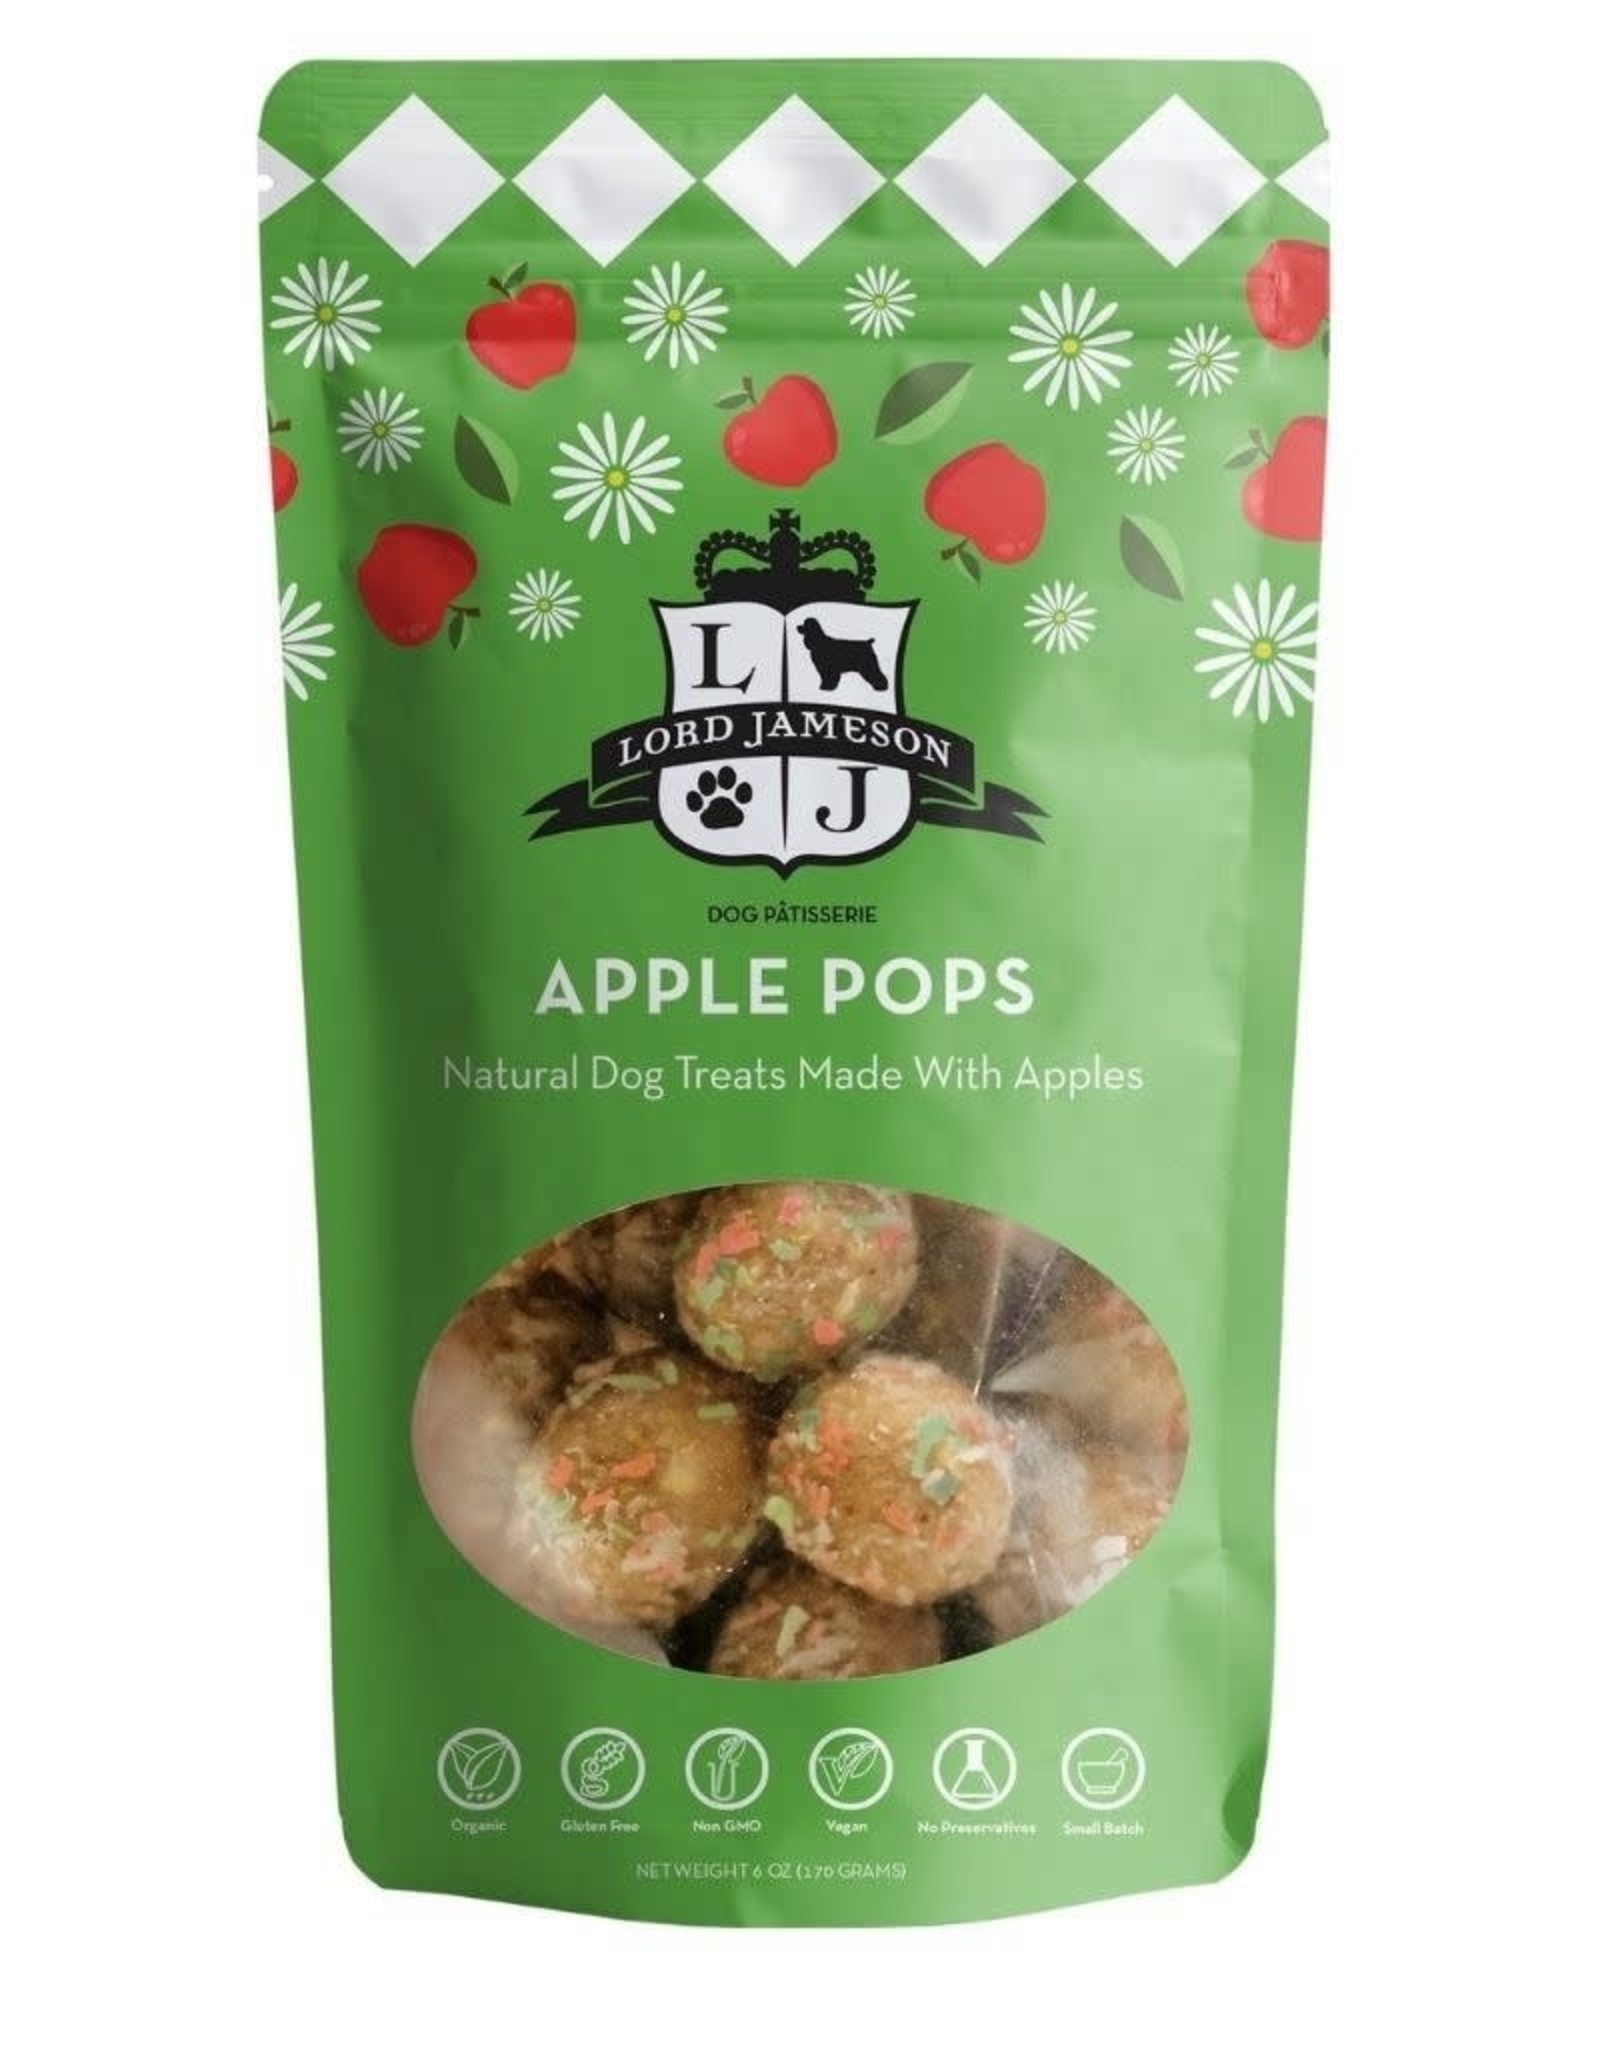 Lord Jameson *DISC* Lord Jameson Gâteries Organique Apple Pops 6oz